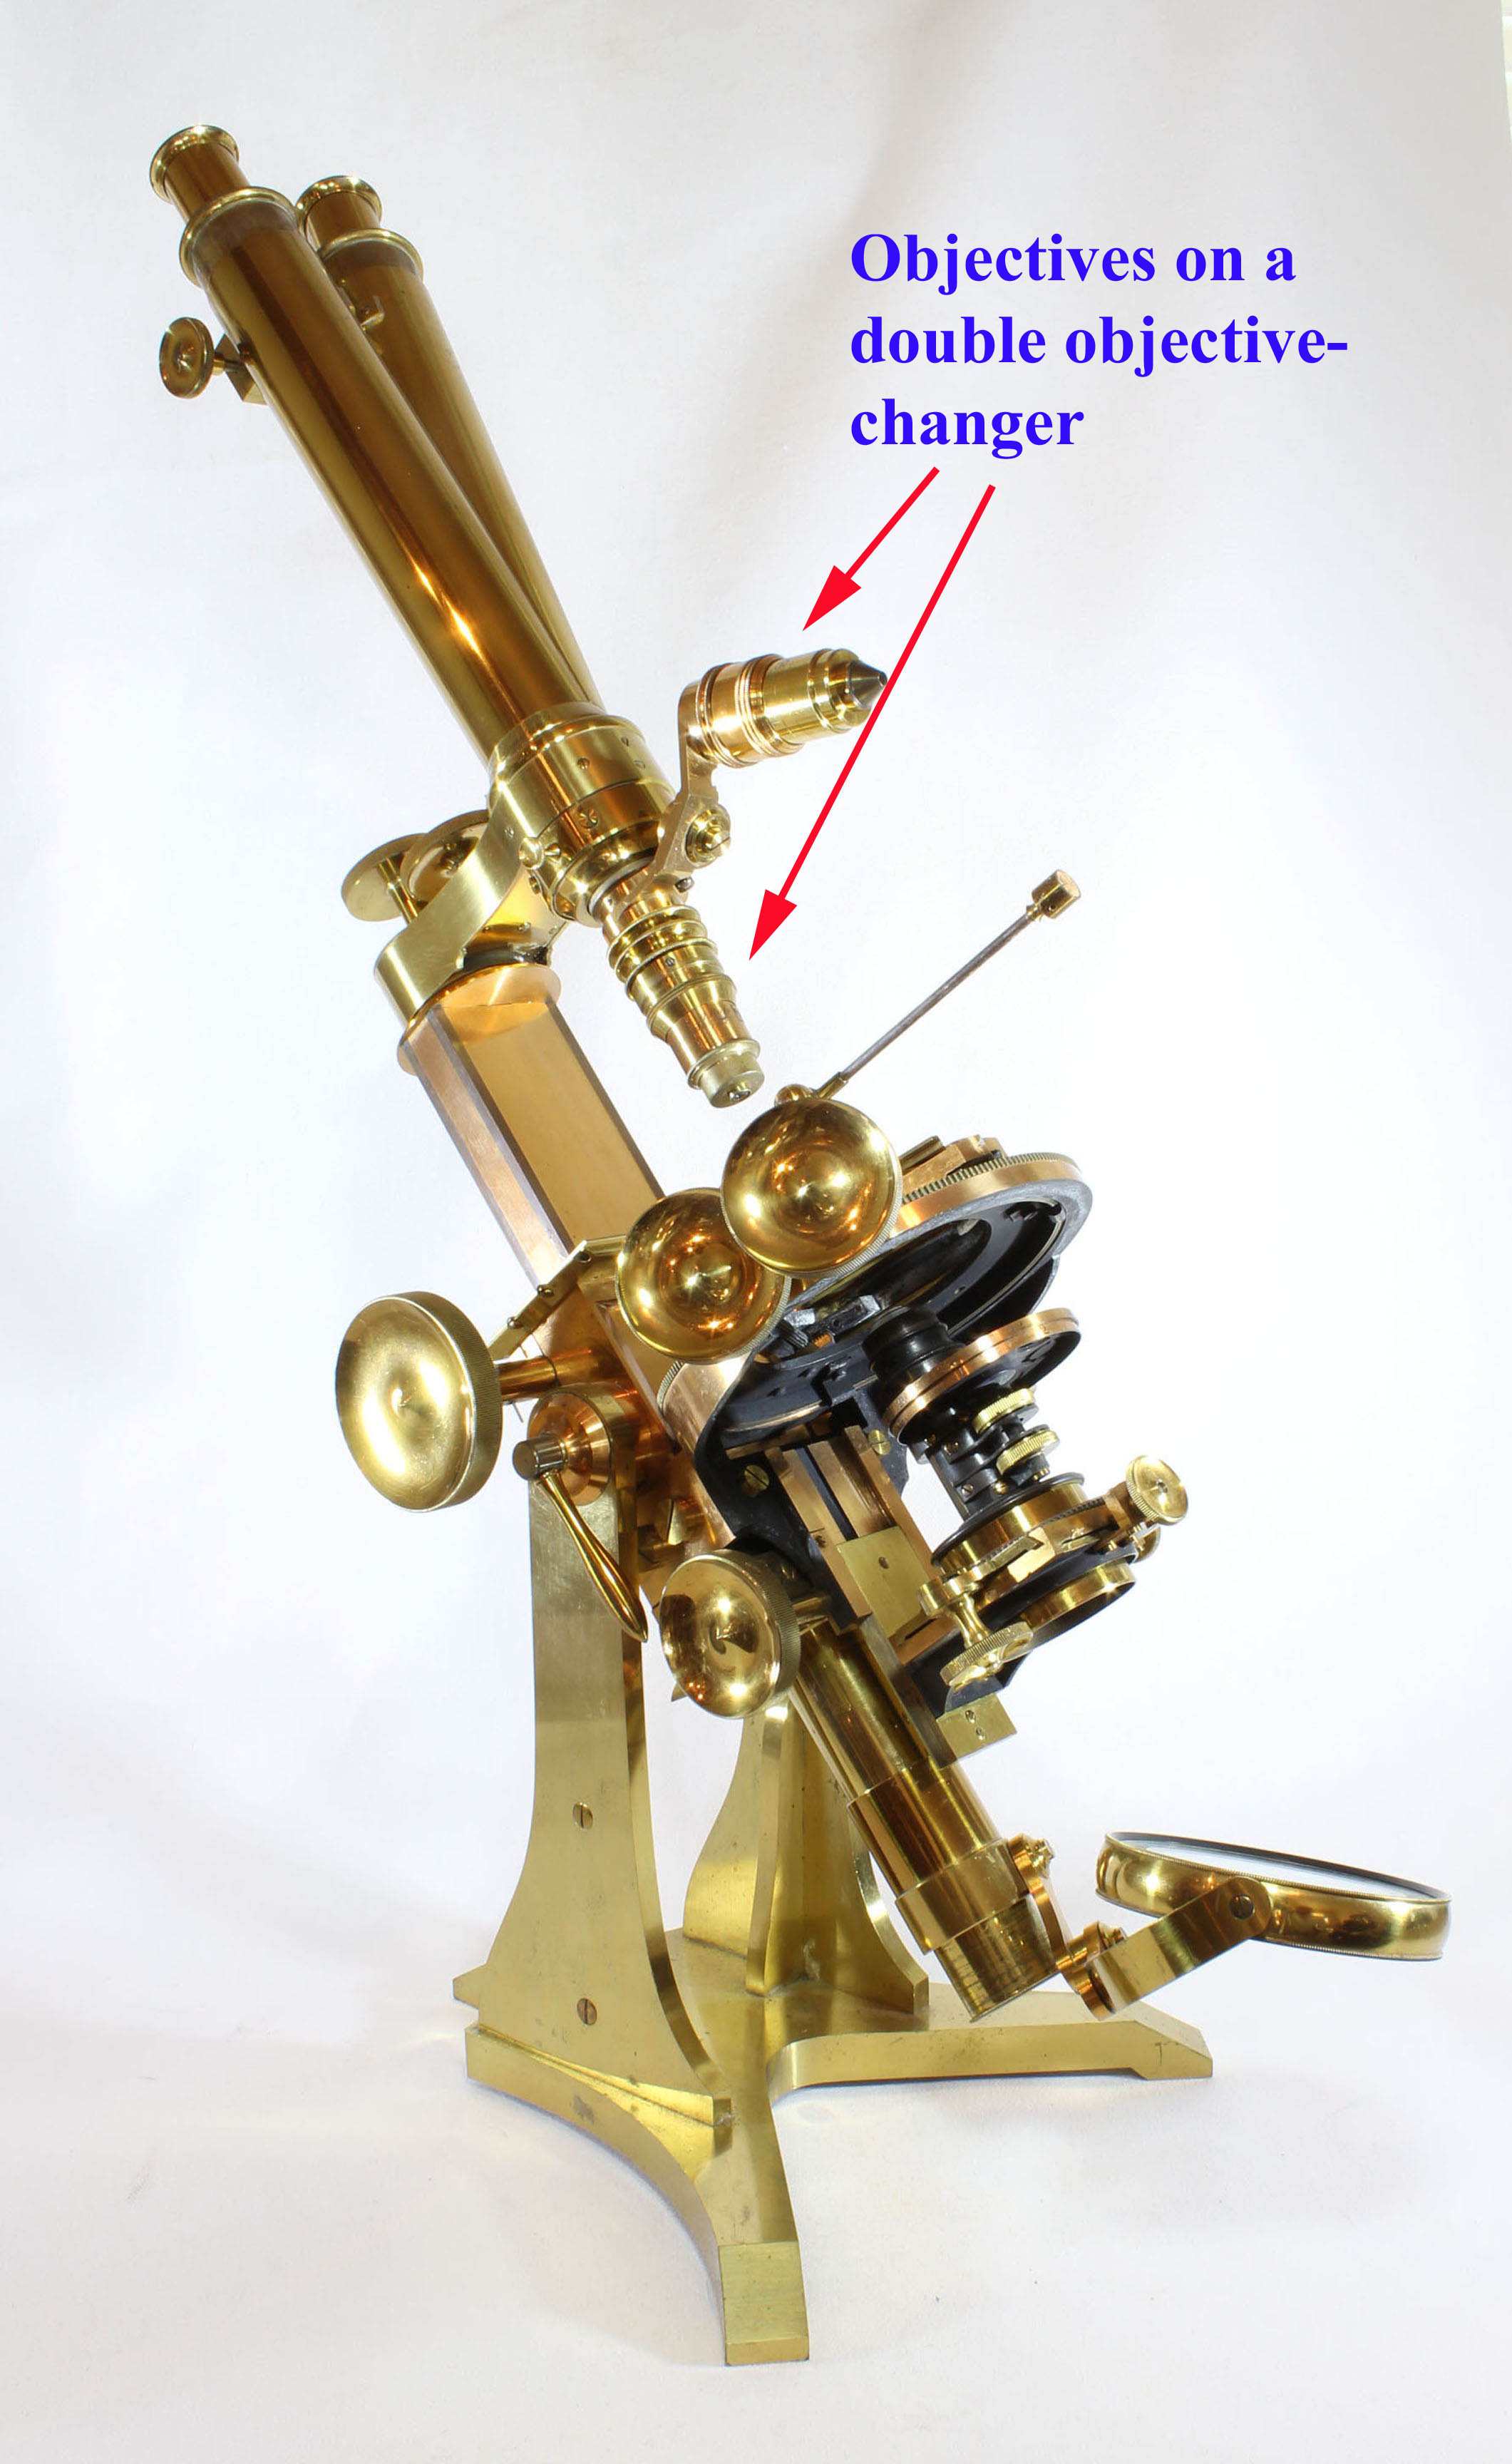 Ross Microscope with double objective changer